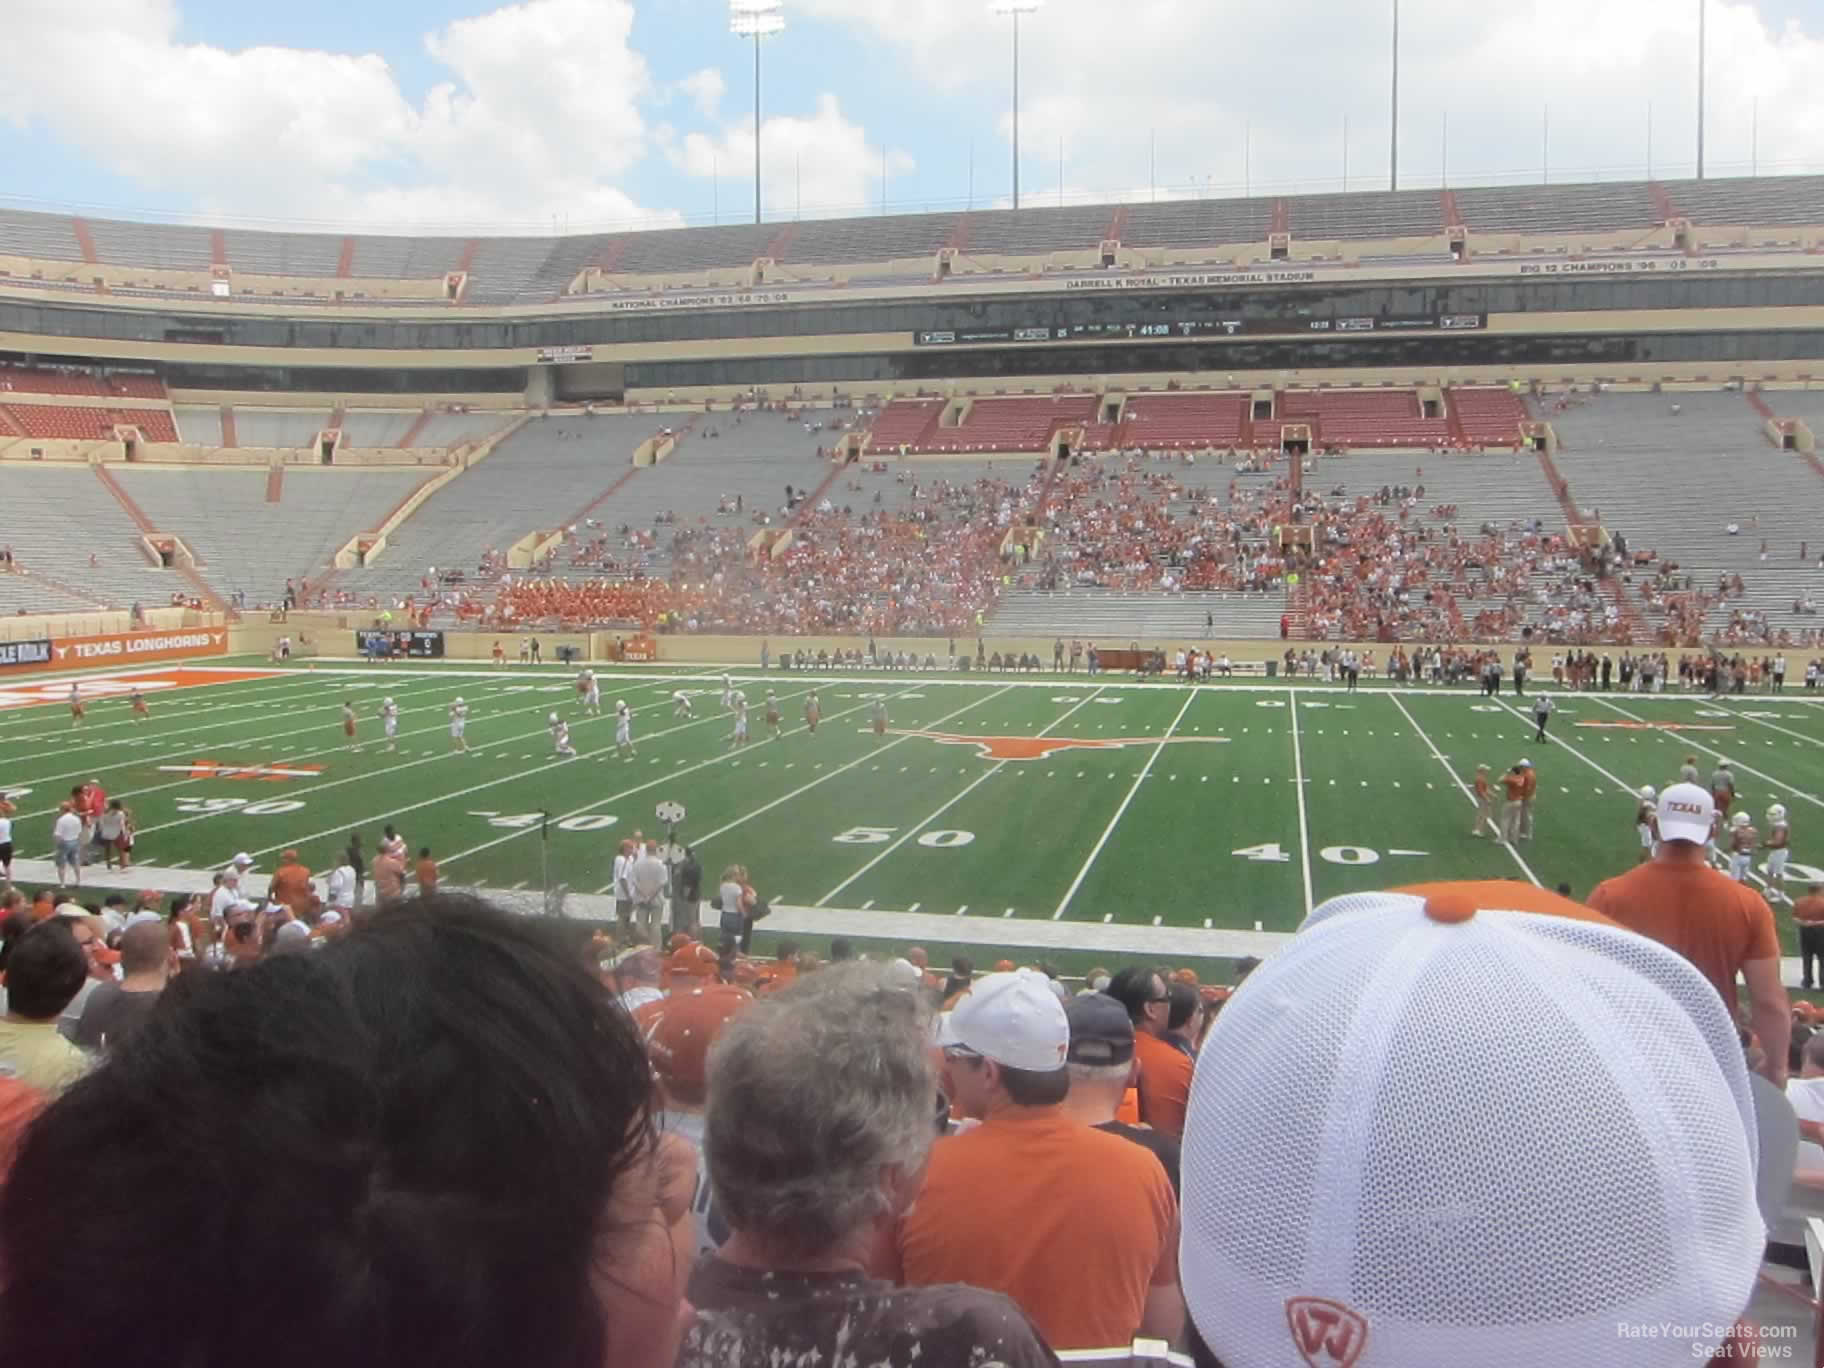 section 4, row 19 seat view  - dkr-texas memorial stadium